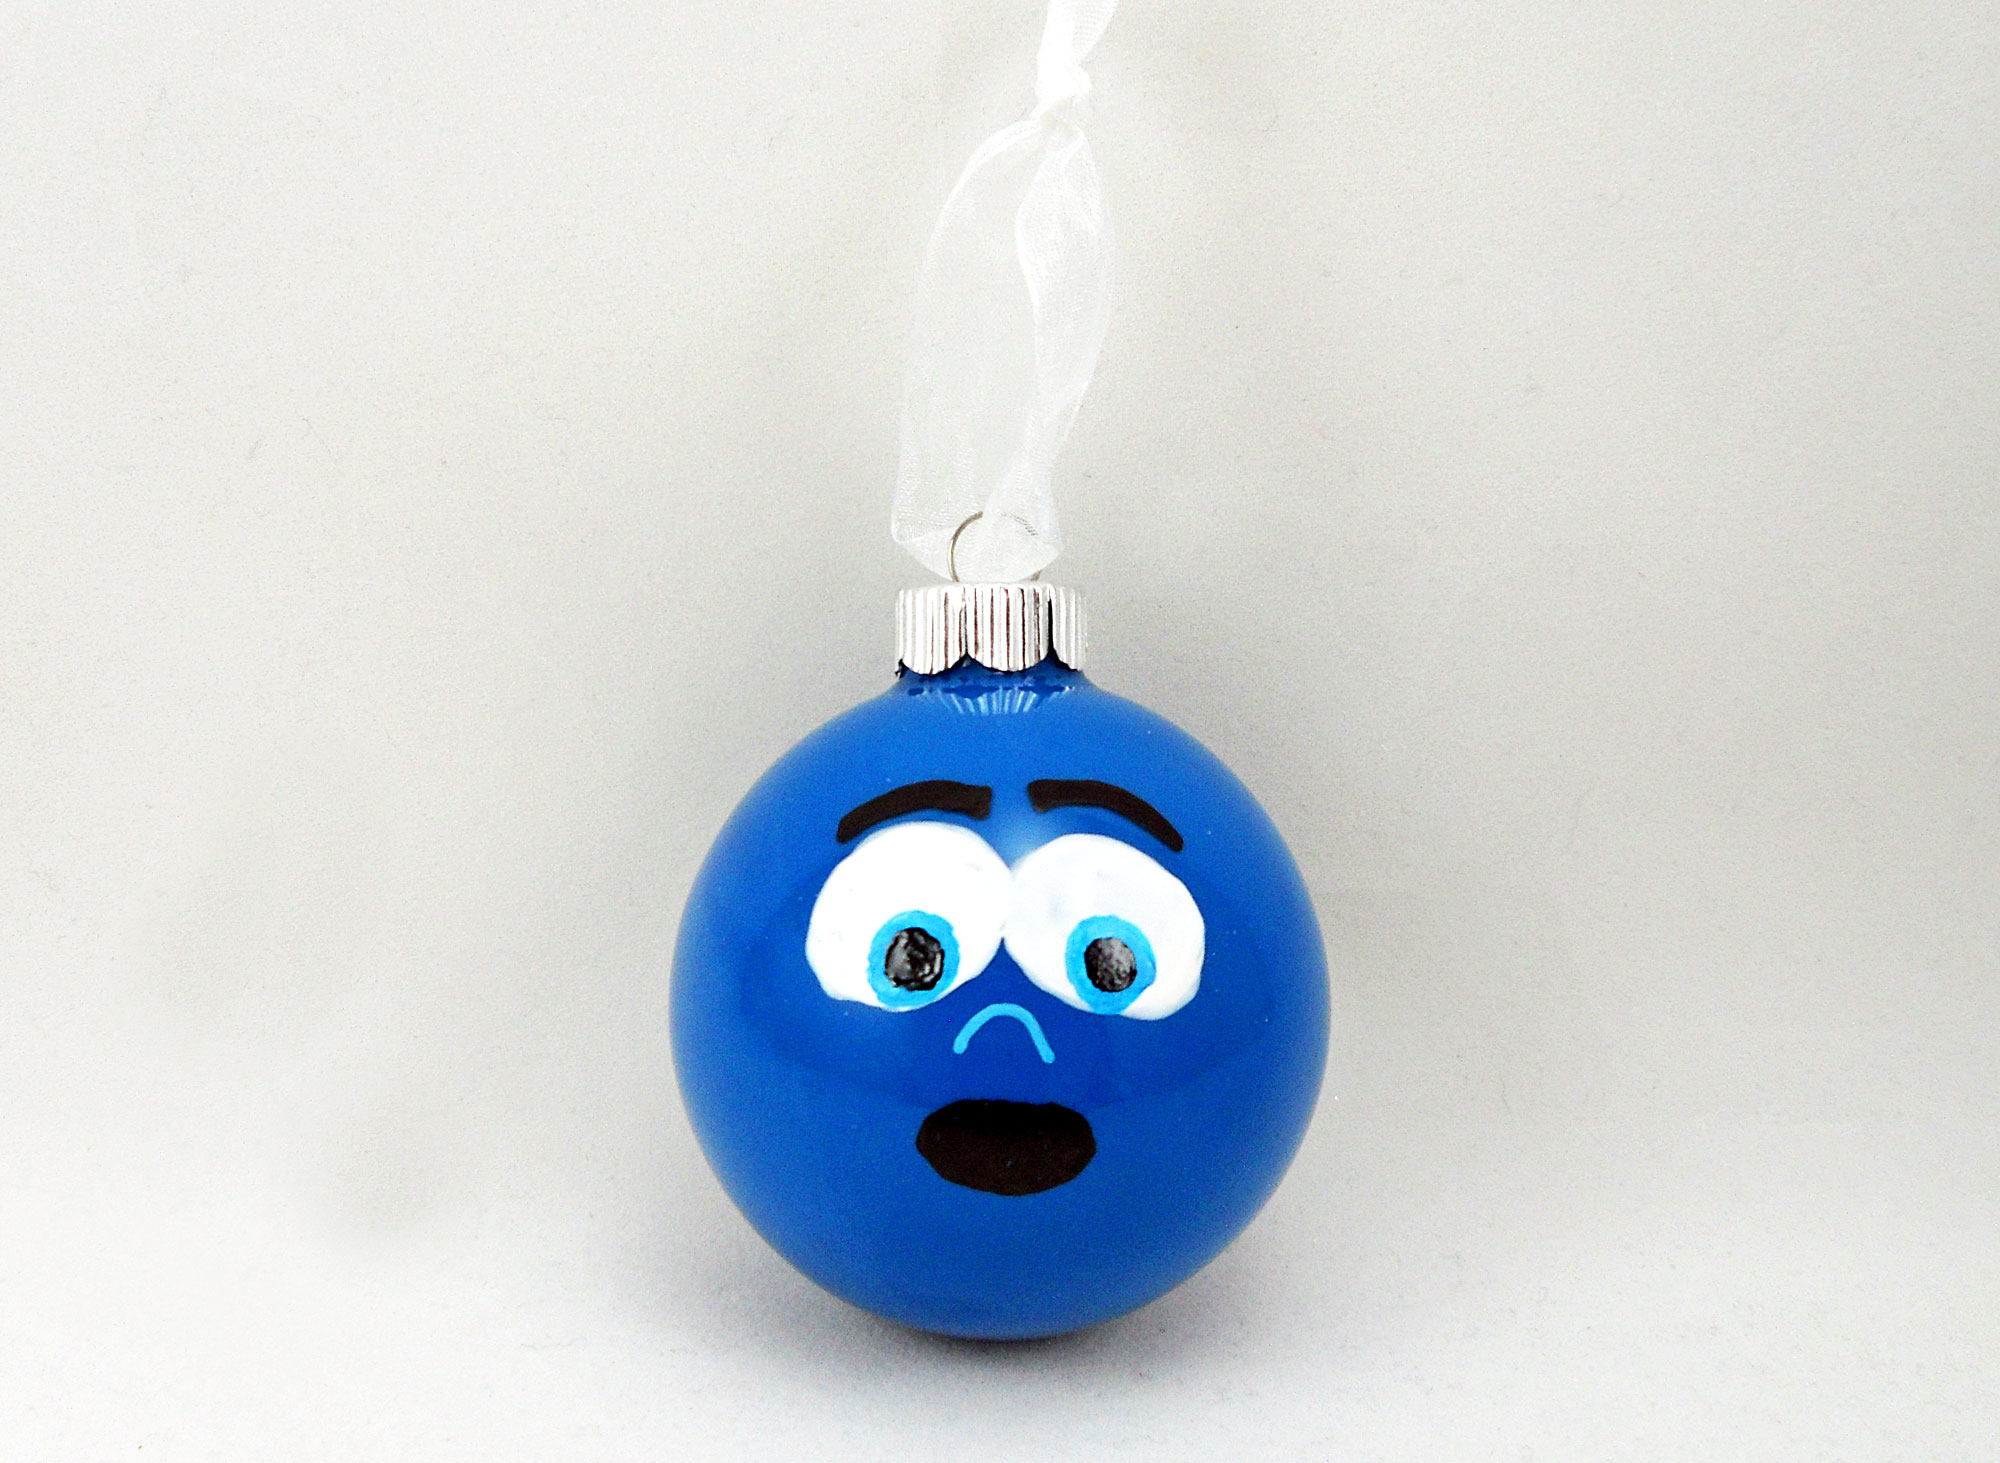 Ribbon placed through top of DIY Smurf ornament | Ornament Shop